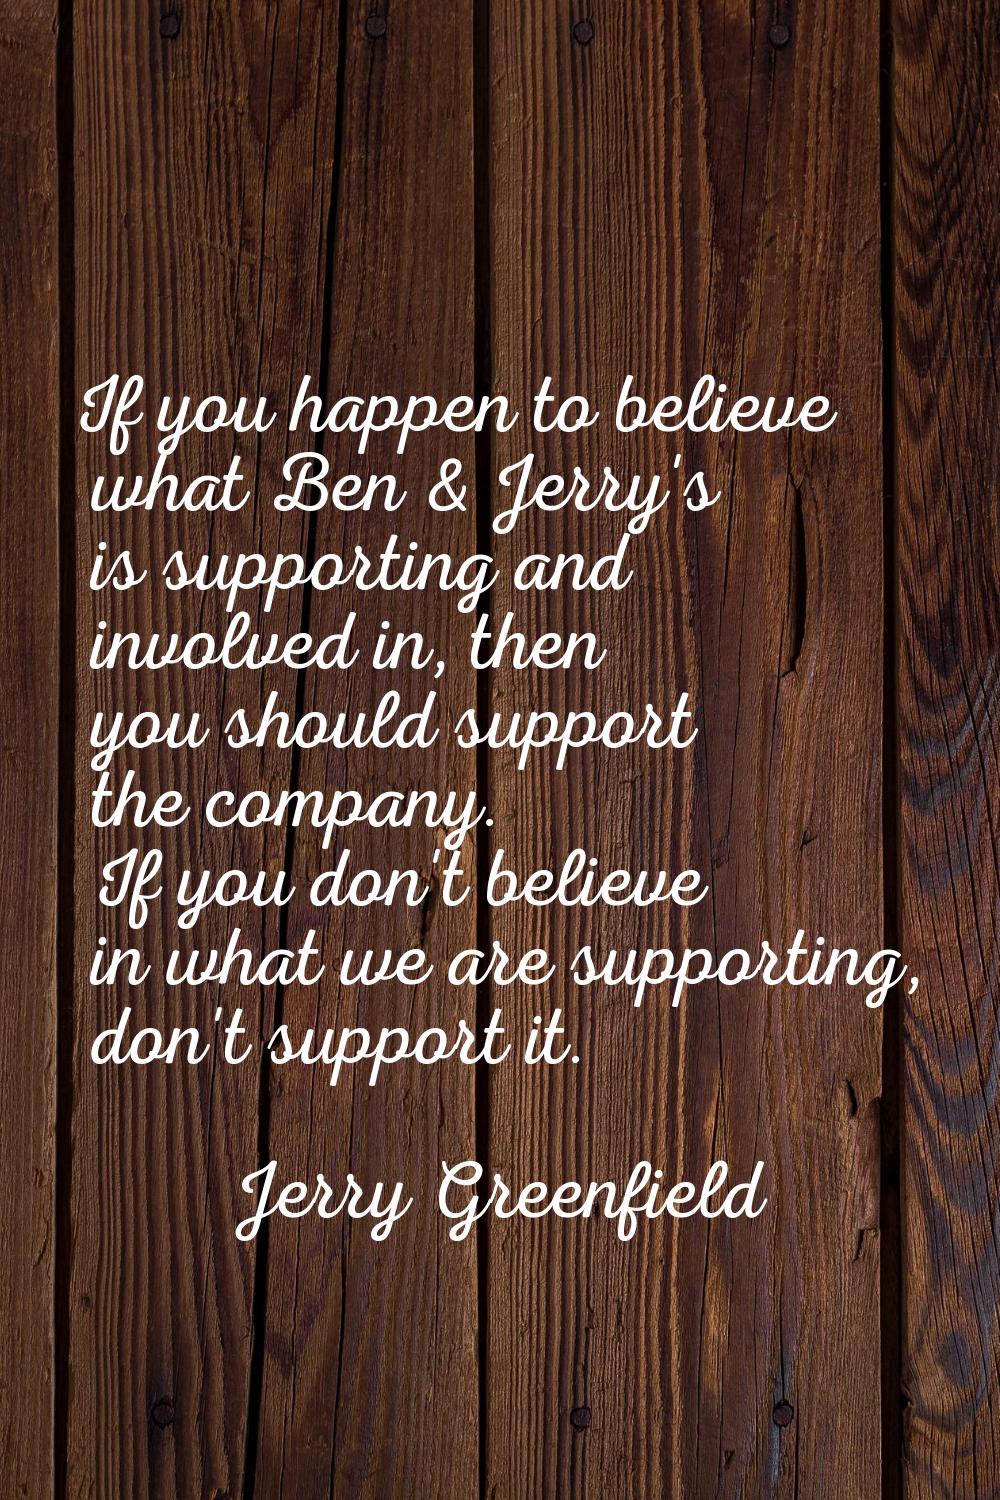 If you happen to believe what Ben & Jerry's is supporting and involved in, then you should support 